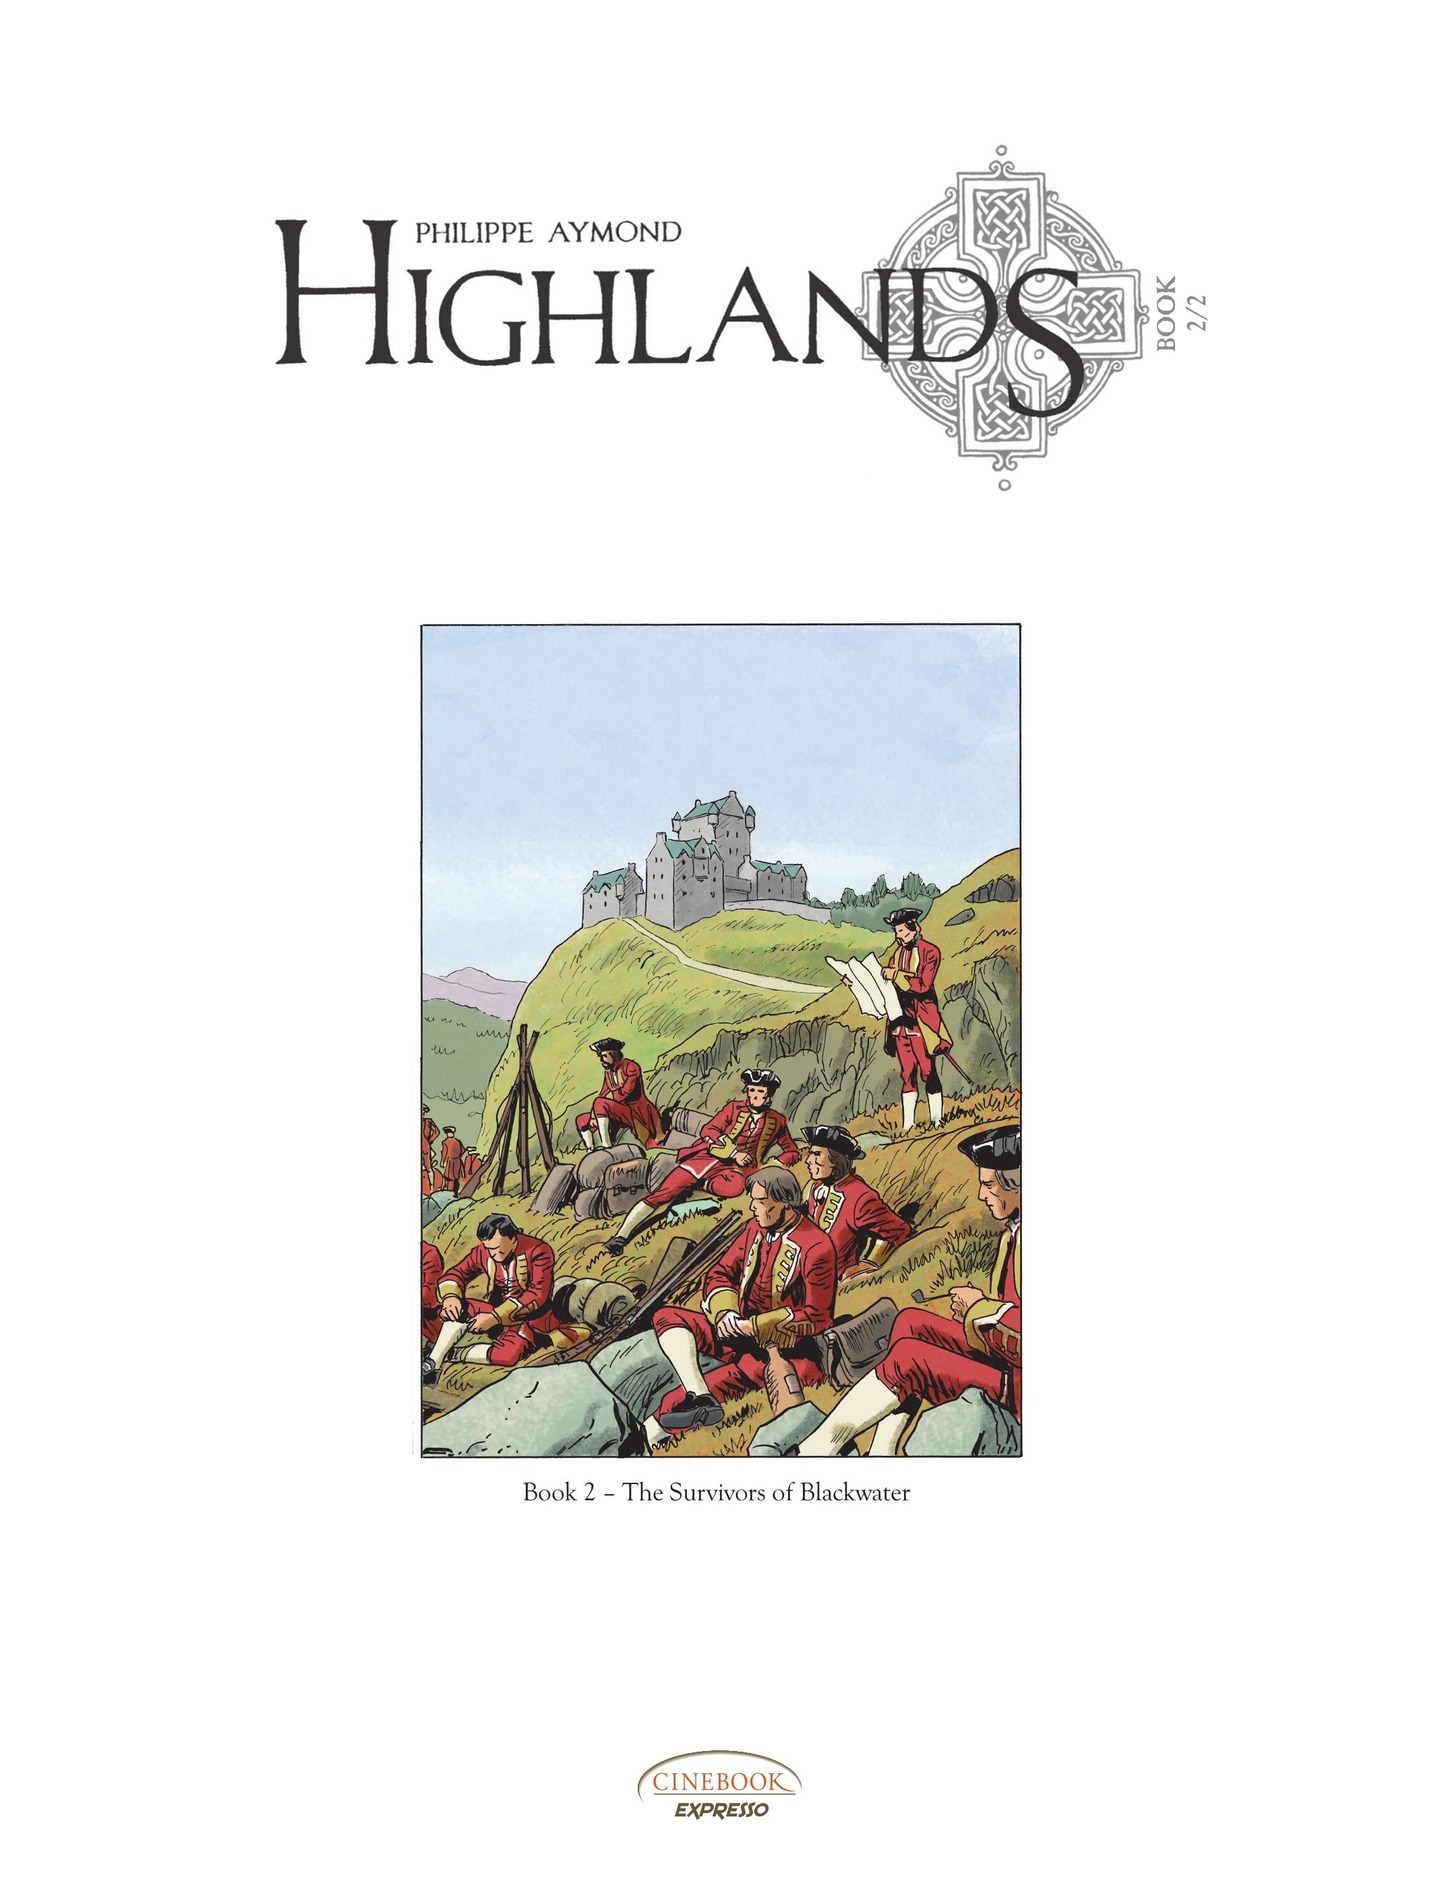 Read online Highlands comic -  Issue #2 - 2